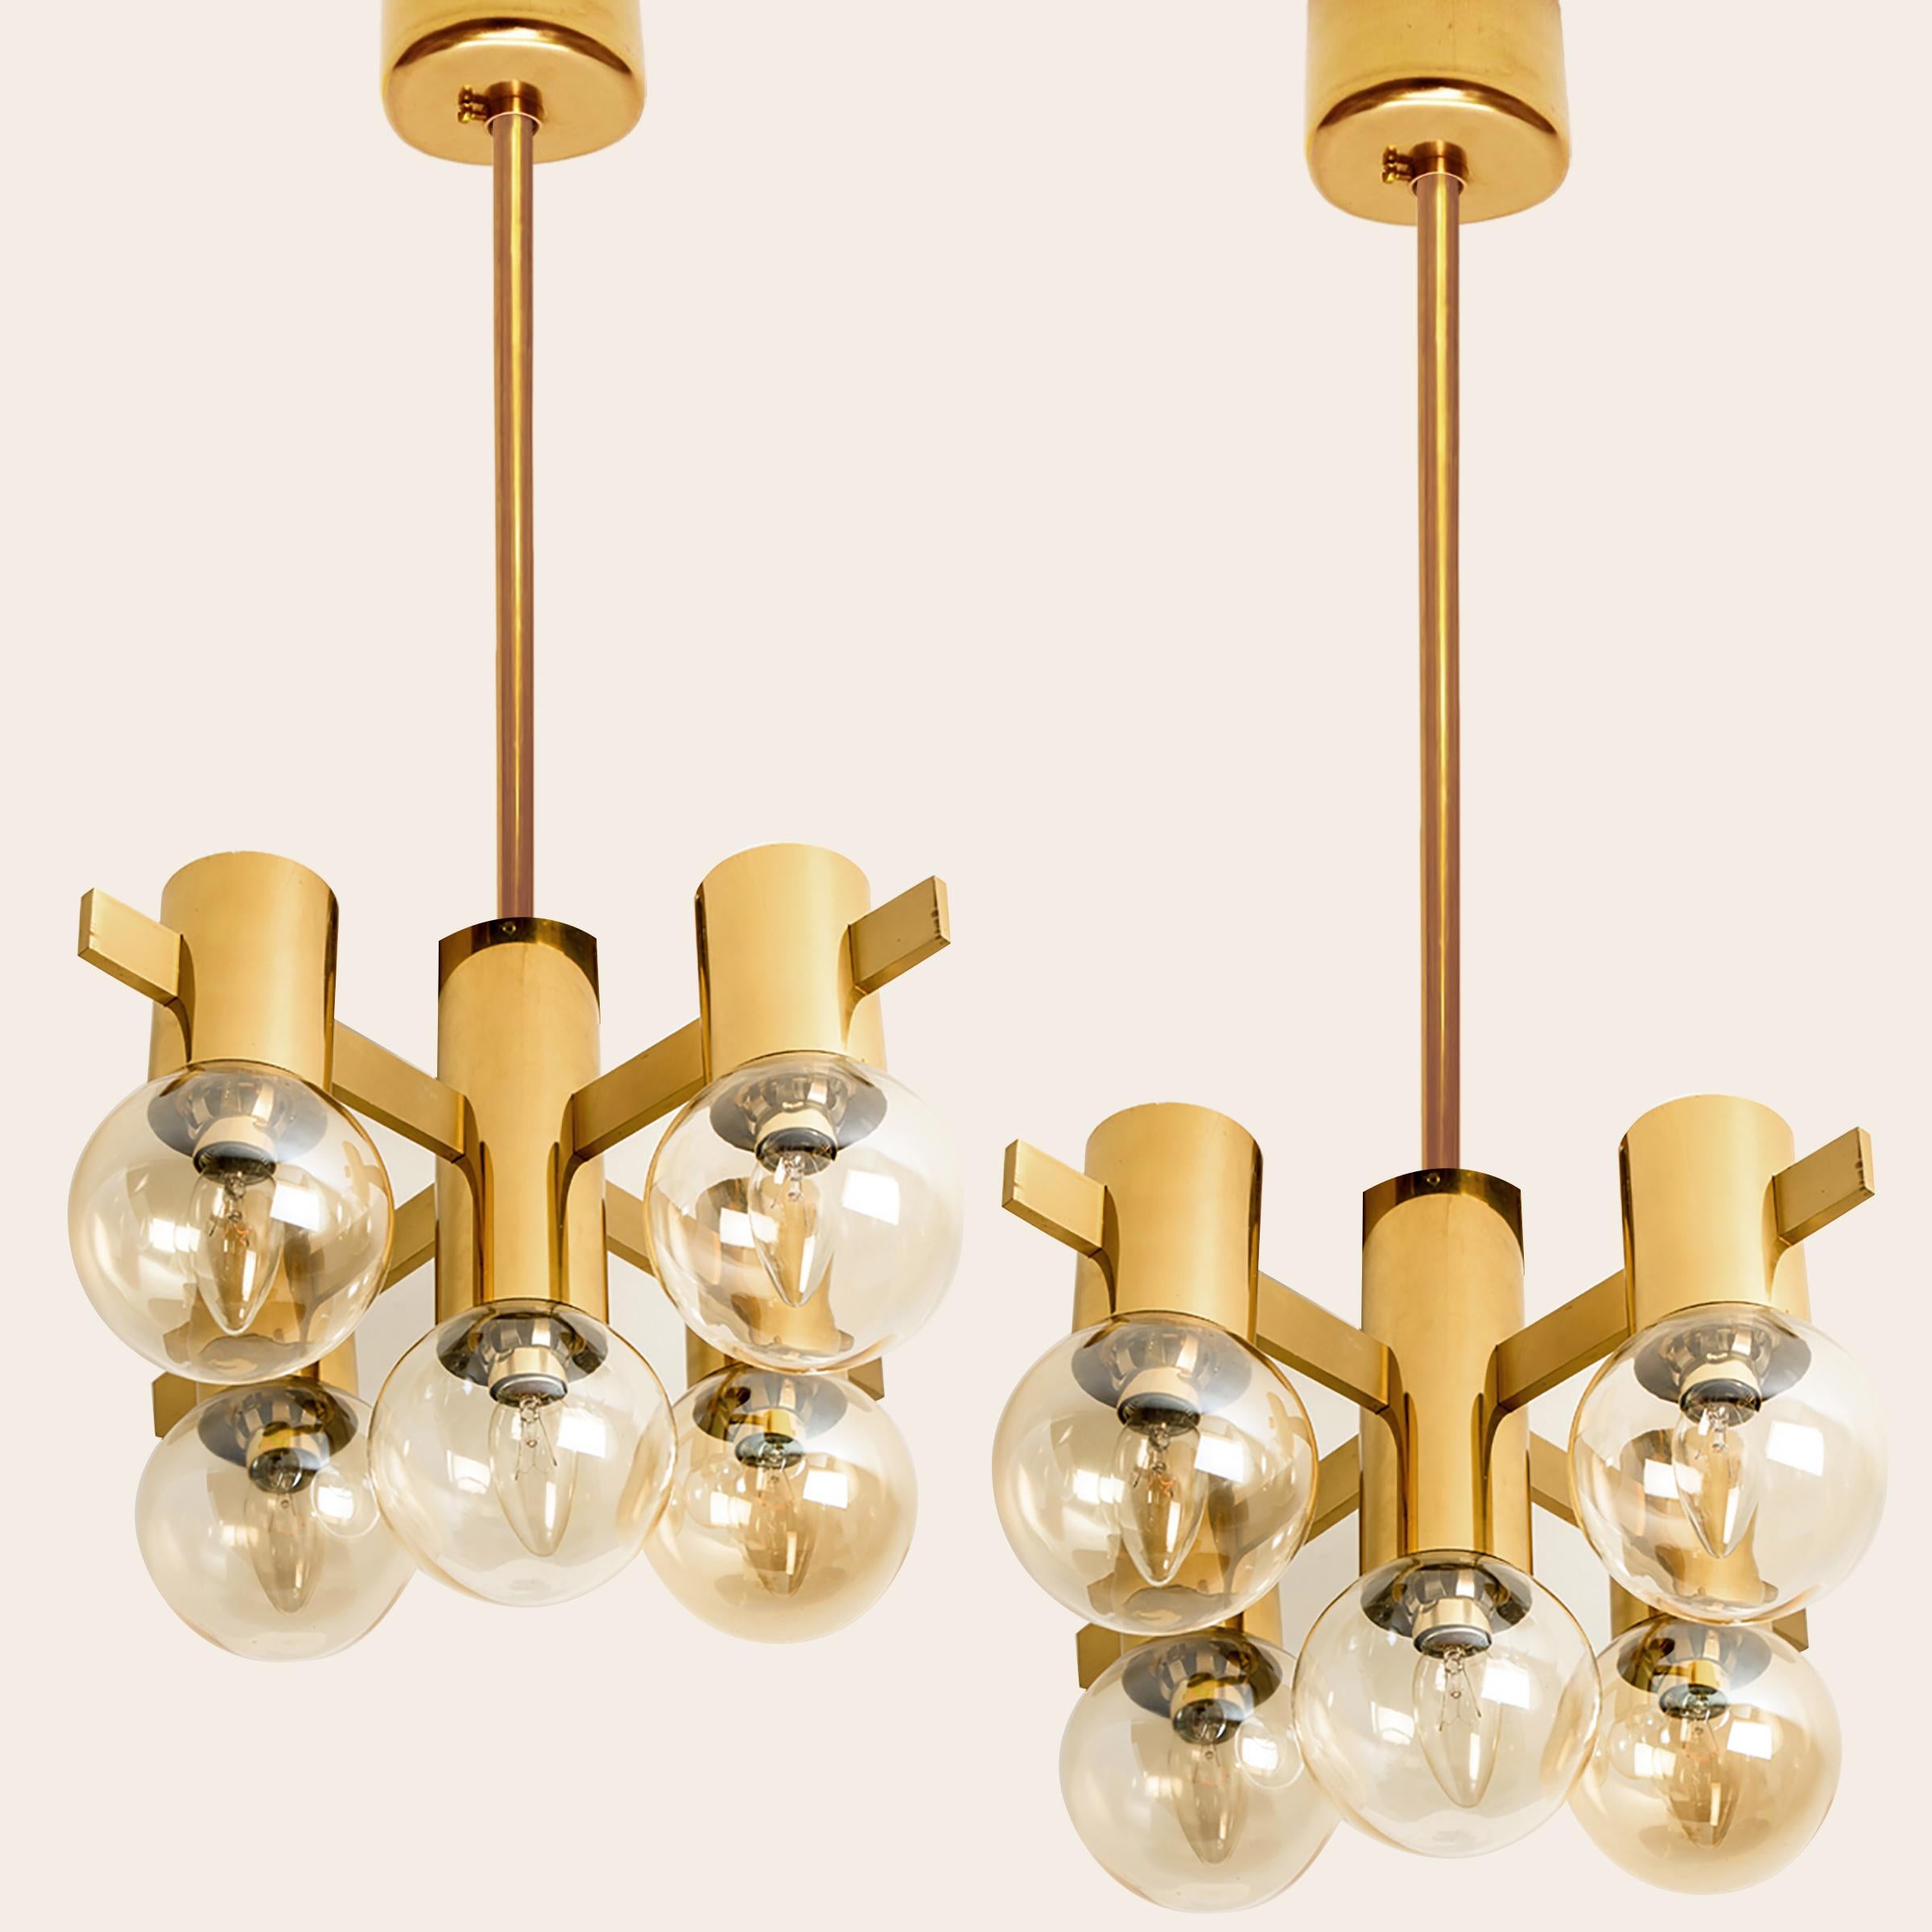 Large Brass and Glass Light Fixture in the Style of Jacobsson, 1960s For Sale 1